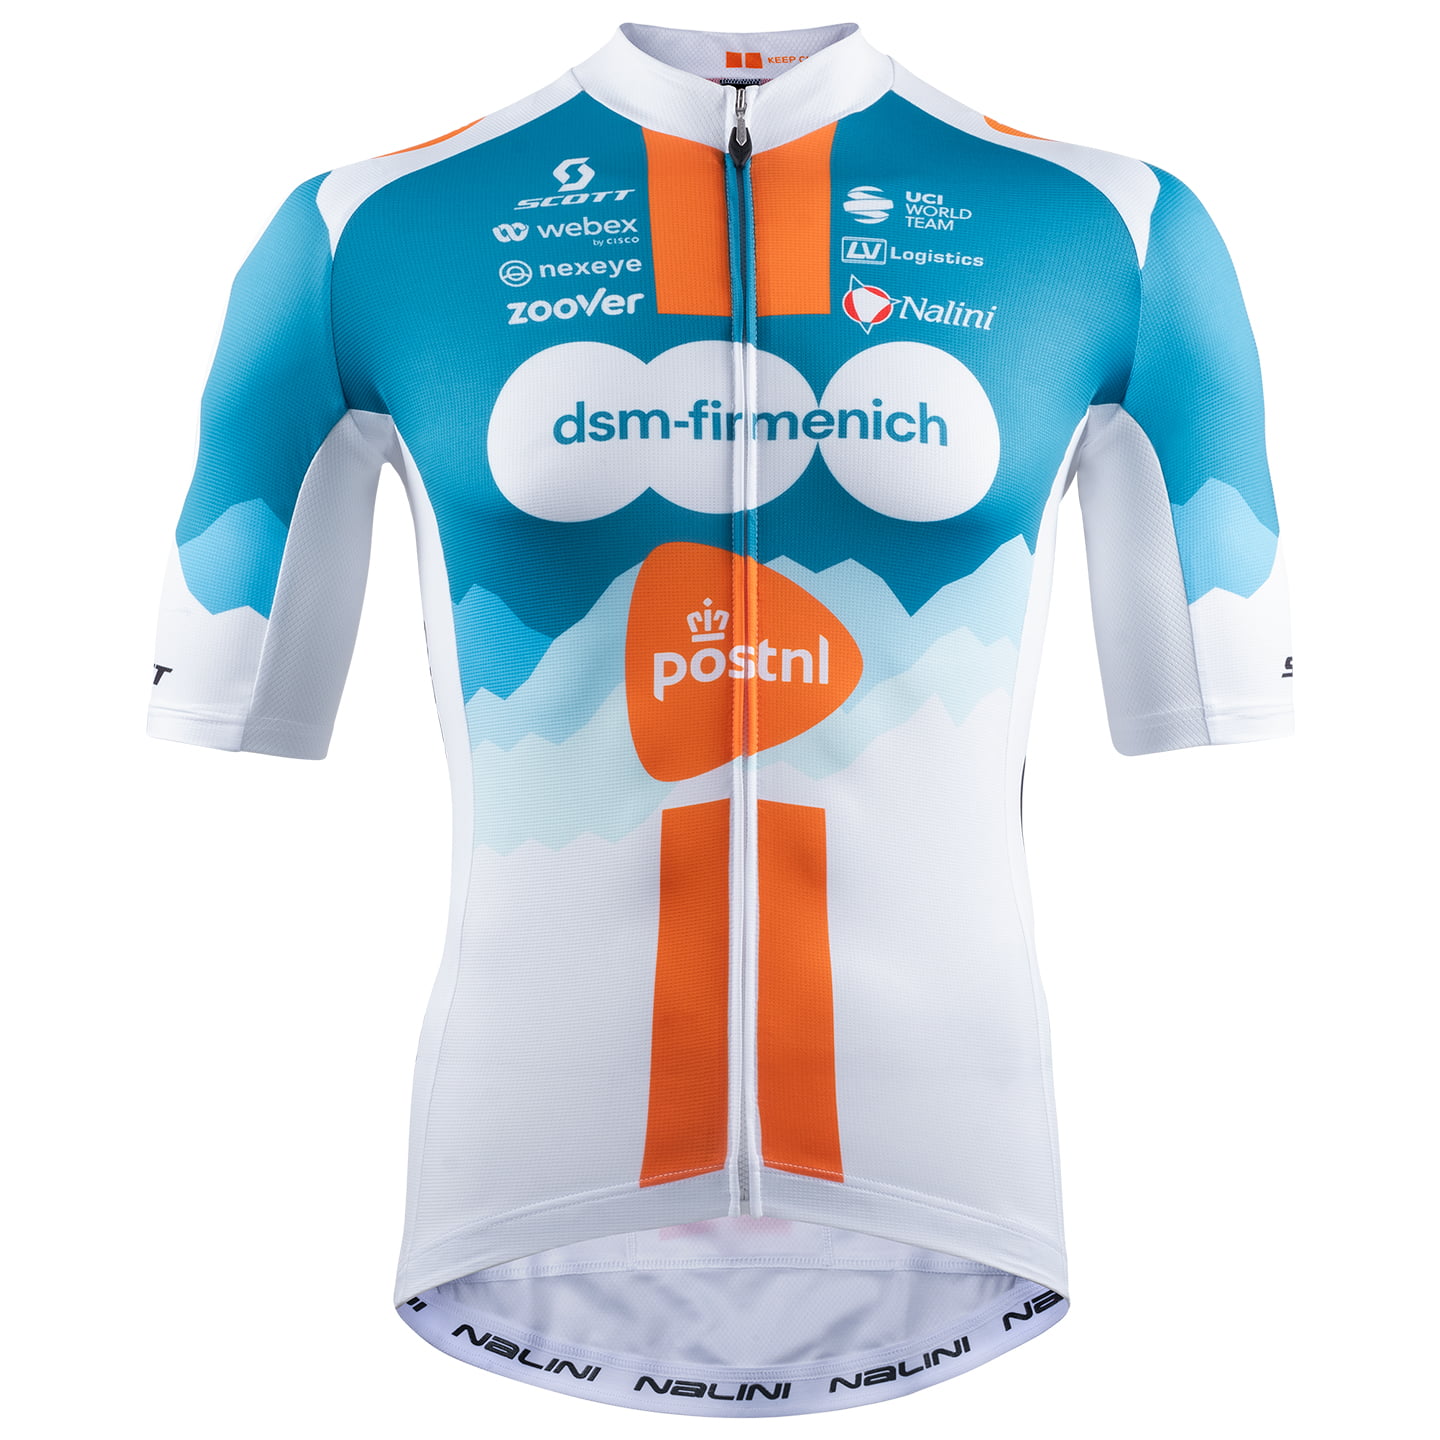 TEAM dsm-firmenich-PostNL 2024 Short Sleeve Jersey, for men, size S, Cycling jersey, Cycling clothing